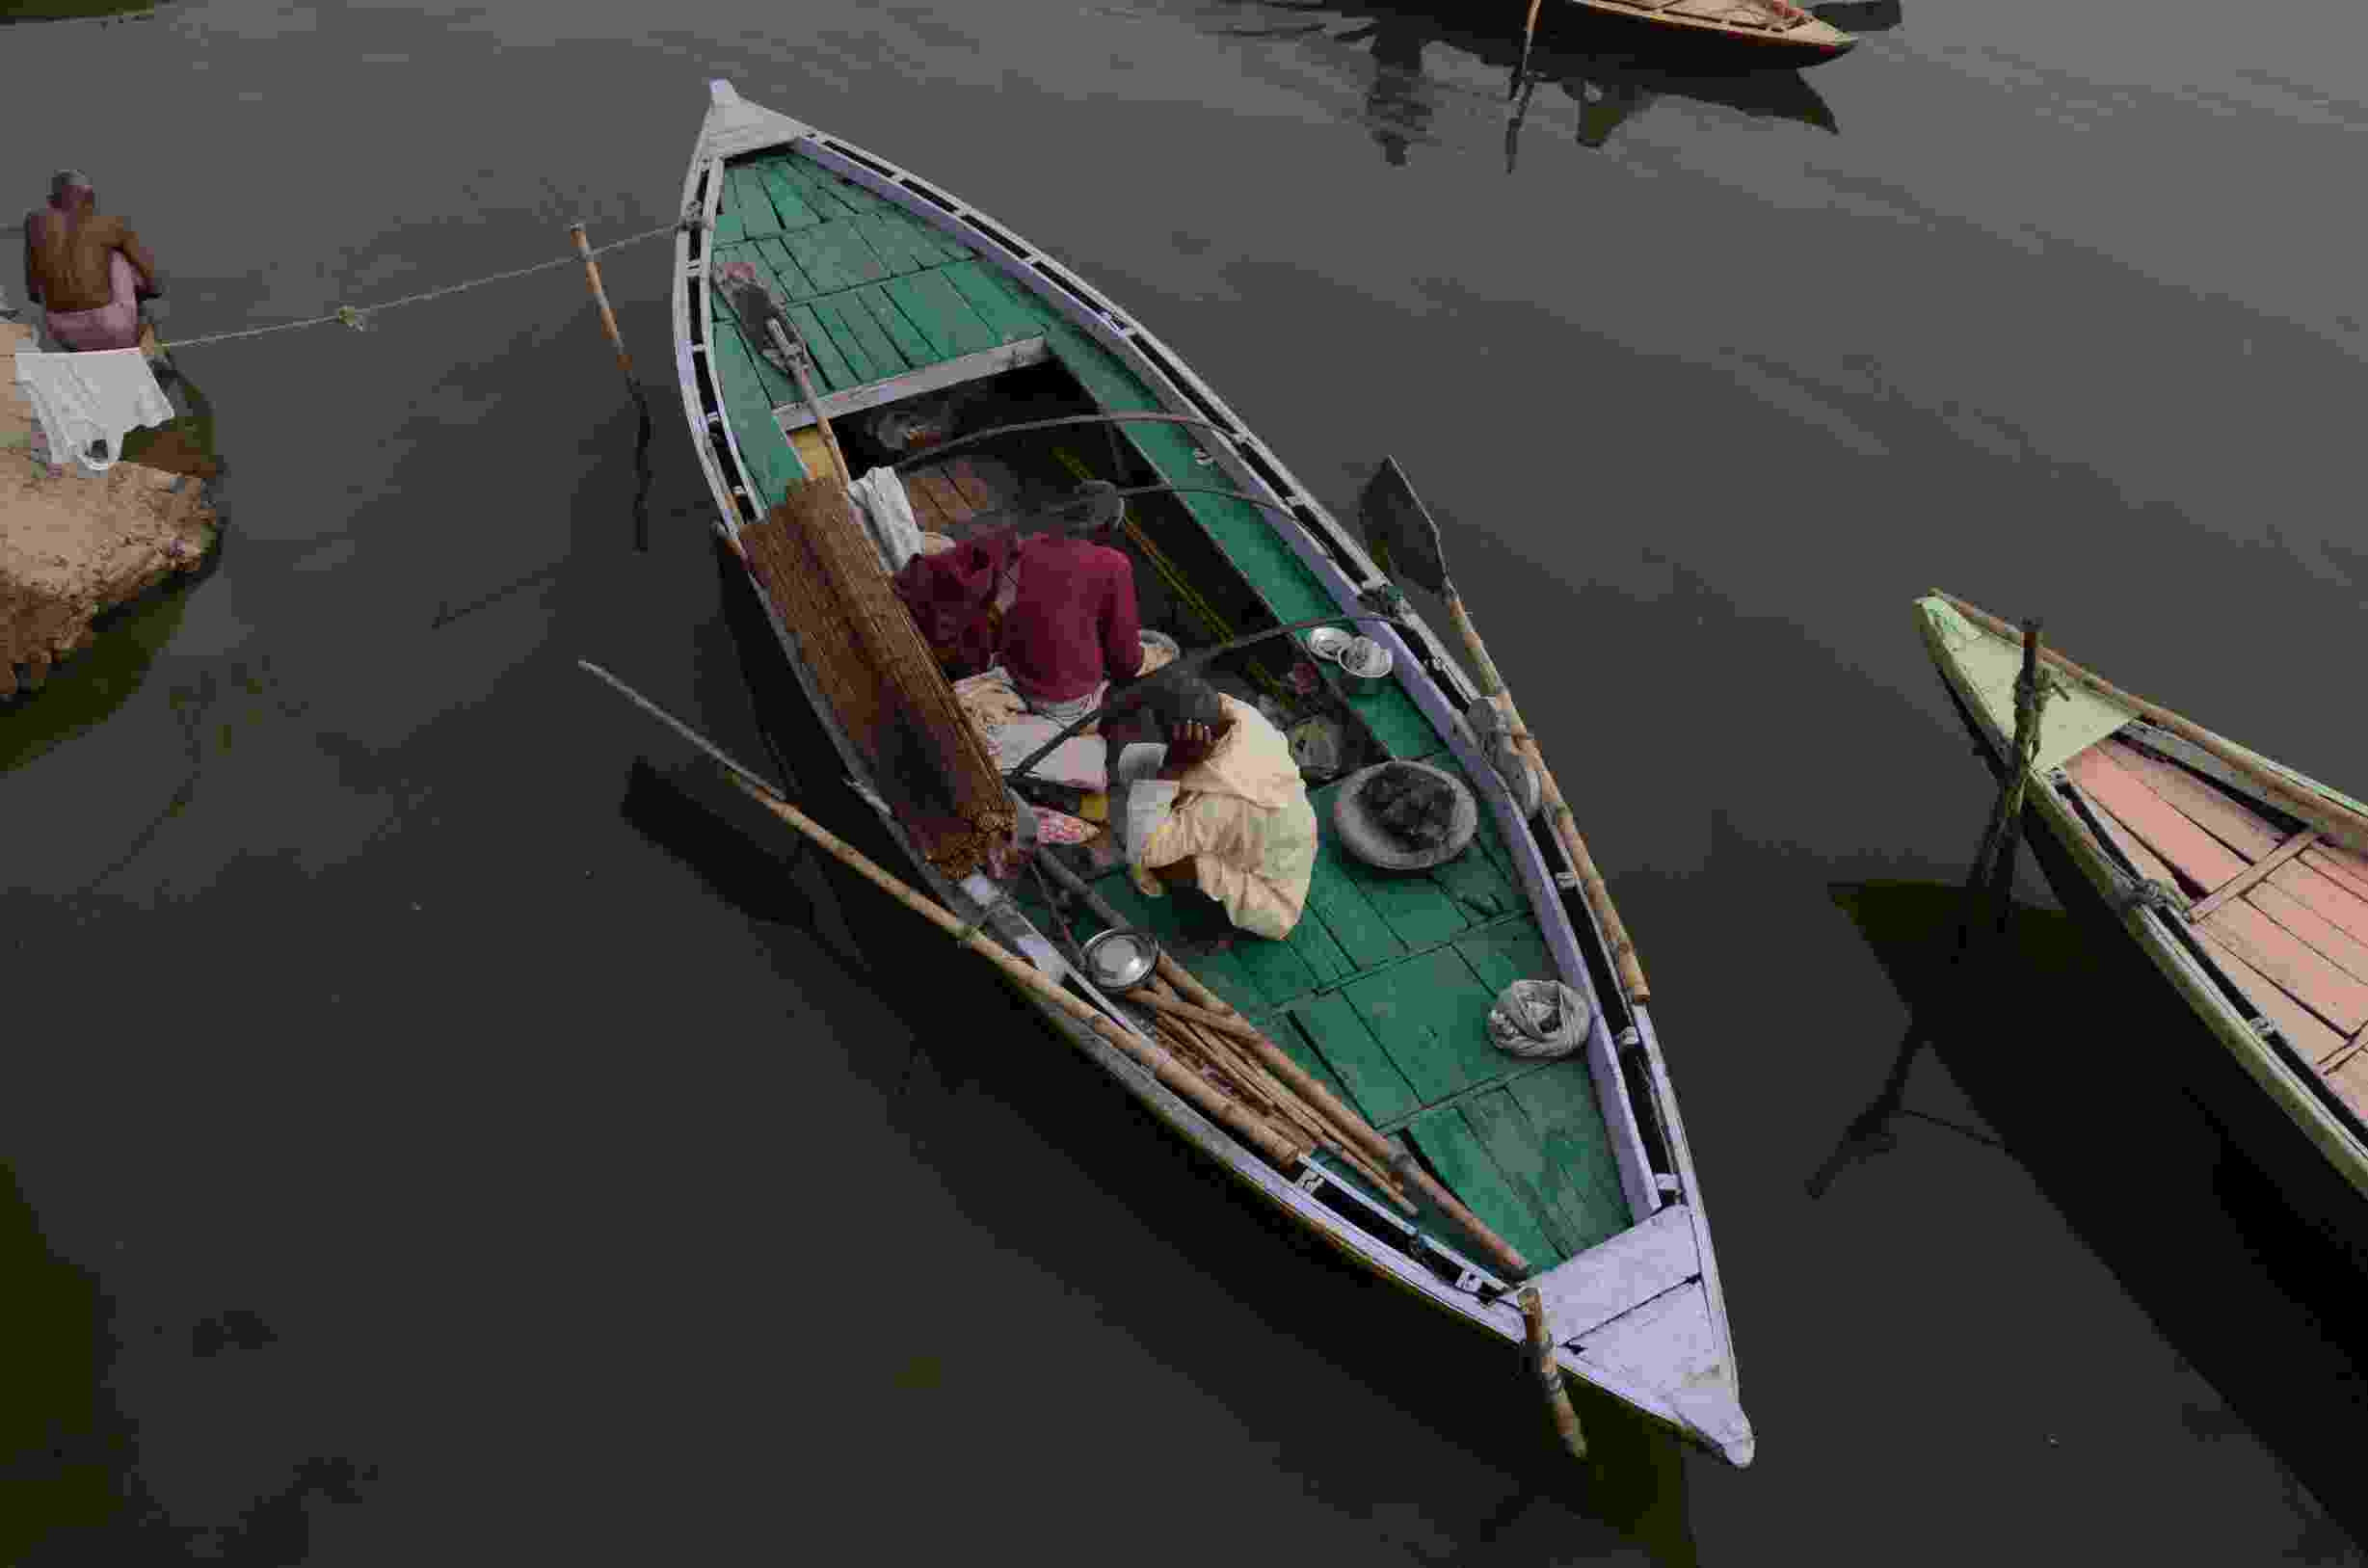 Image shows two local boatmen of Varanasi pictured from above, in their green rowing boat on the River Ganges